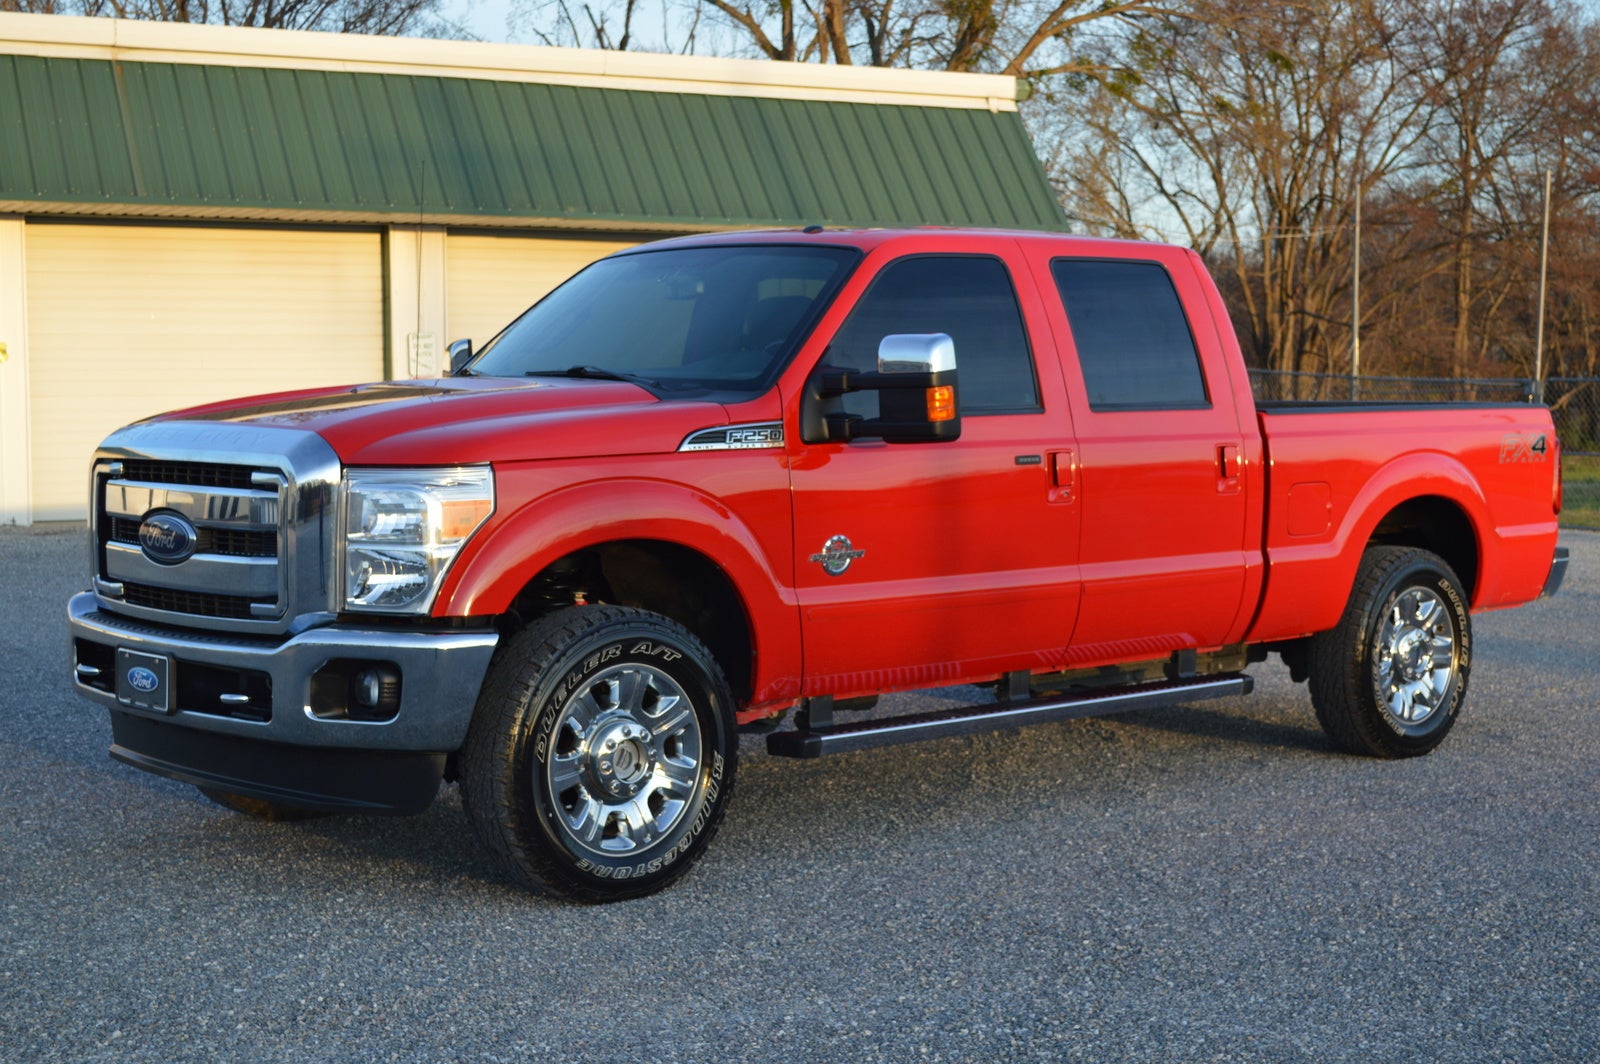 2012 Ford F-250 Super Duty - Pictures - CarGurus